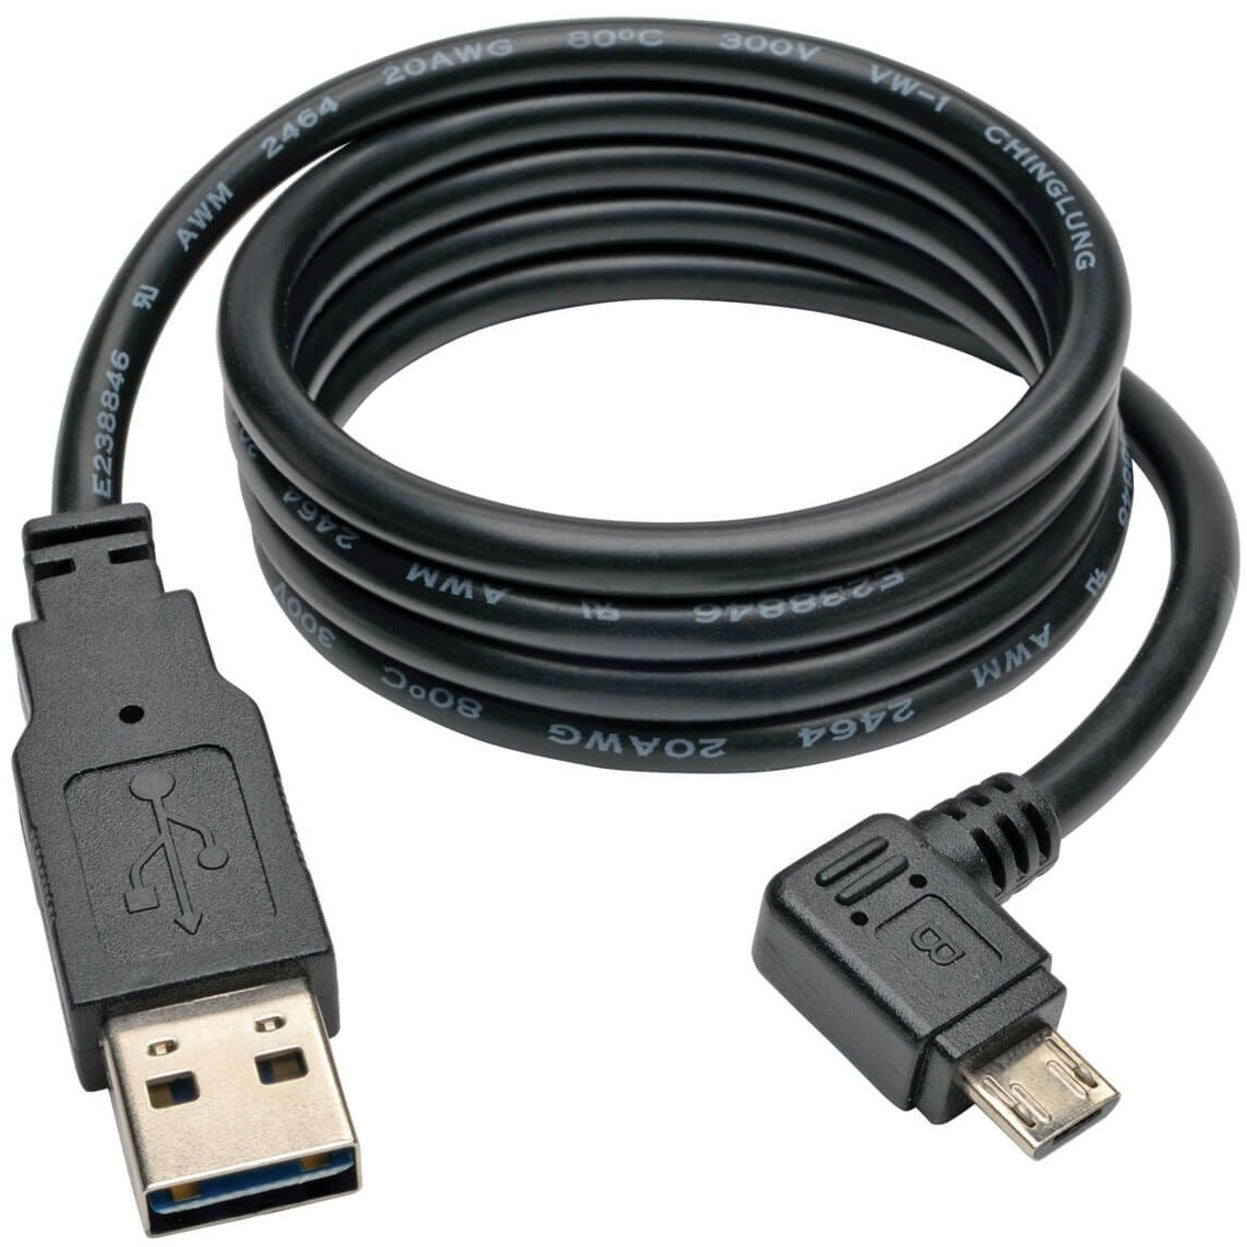 Tripp Lite UR05C-003-RB Charging Cable, 3 ft, Black, USB Type A to Micro USB, 5V DC